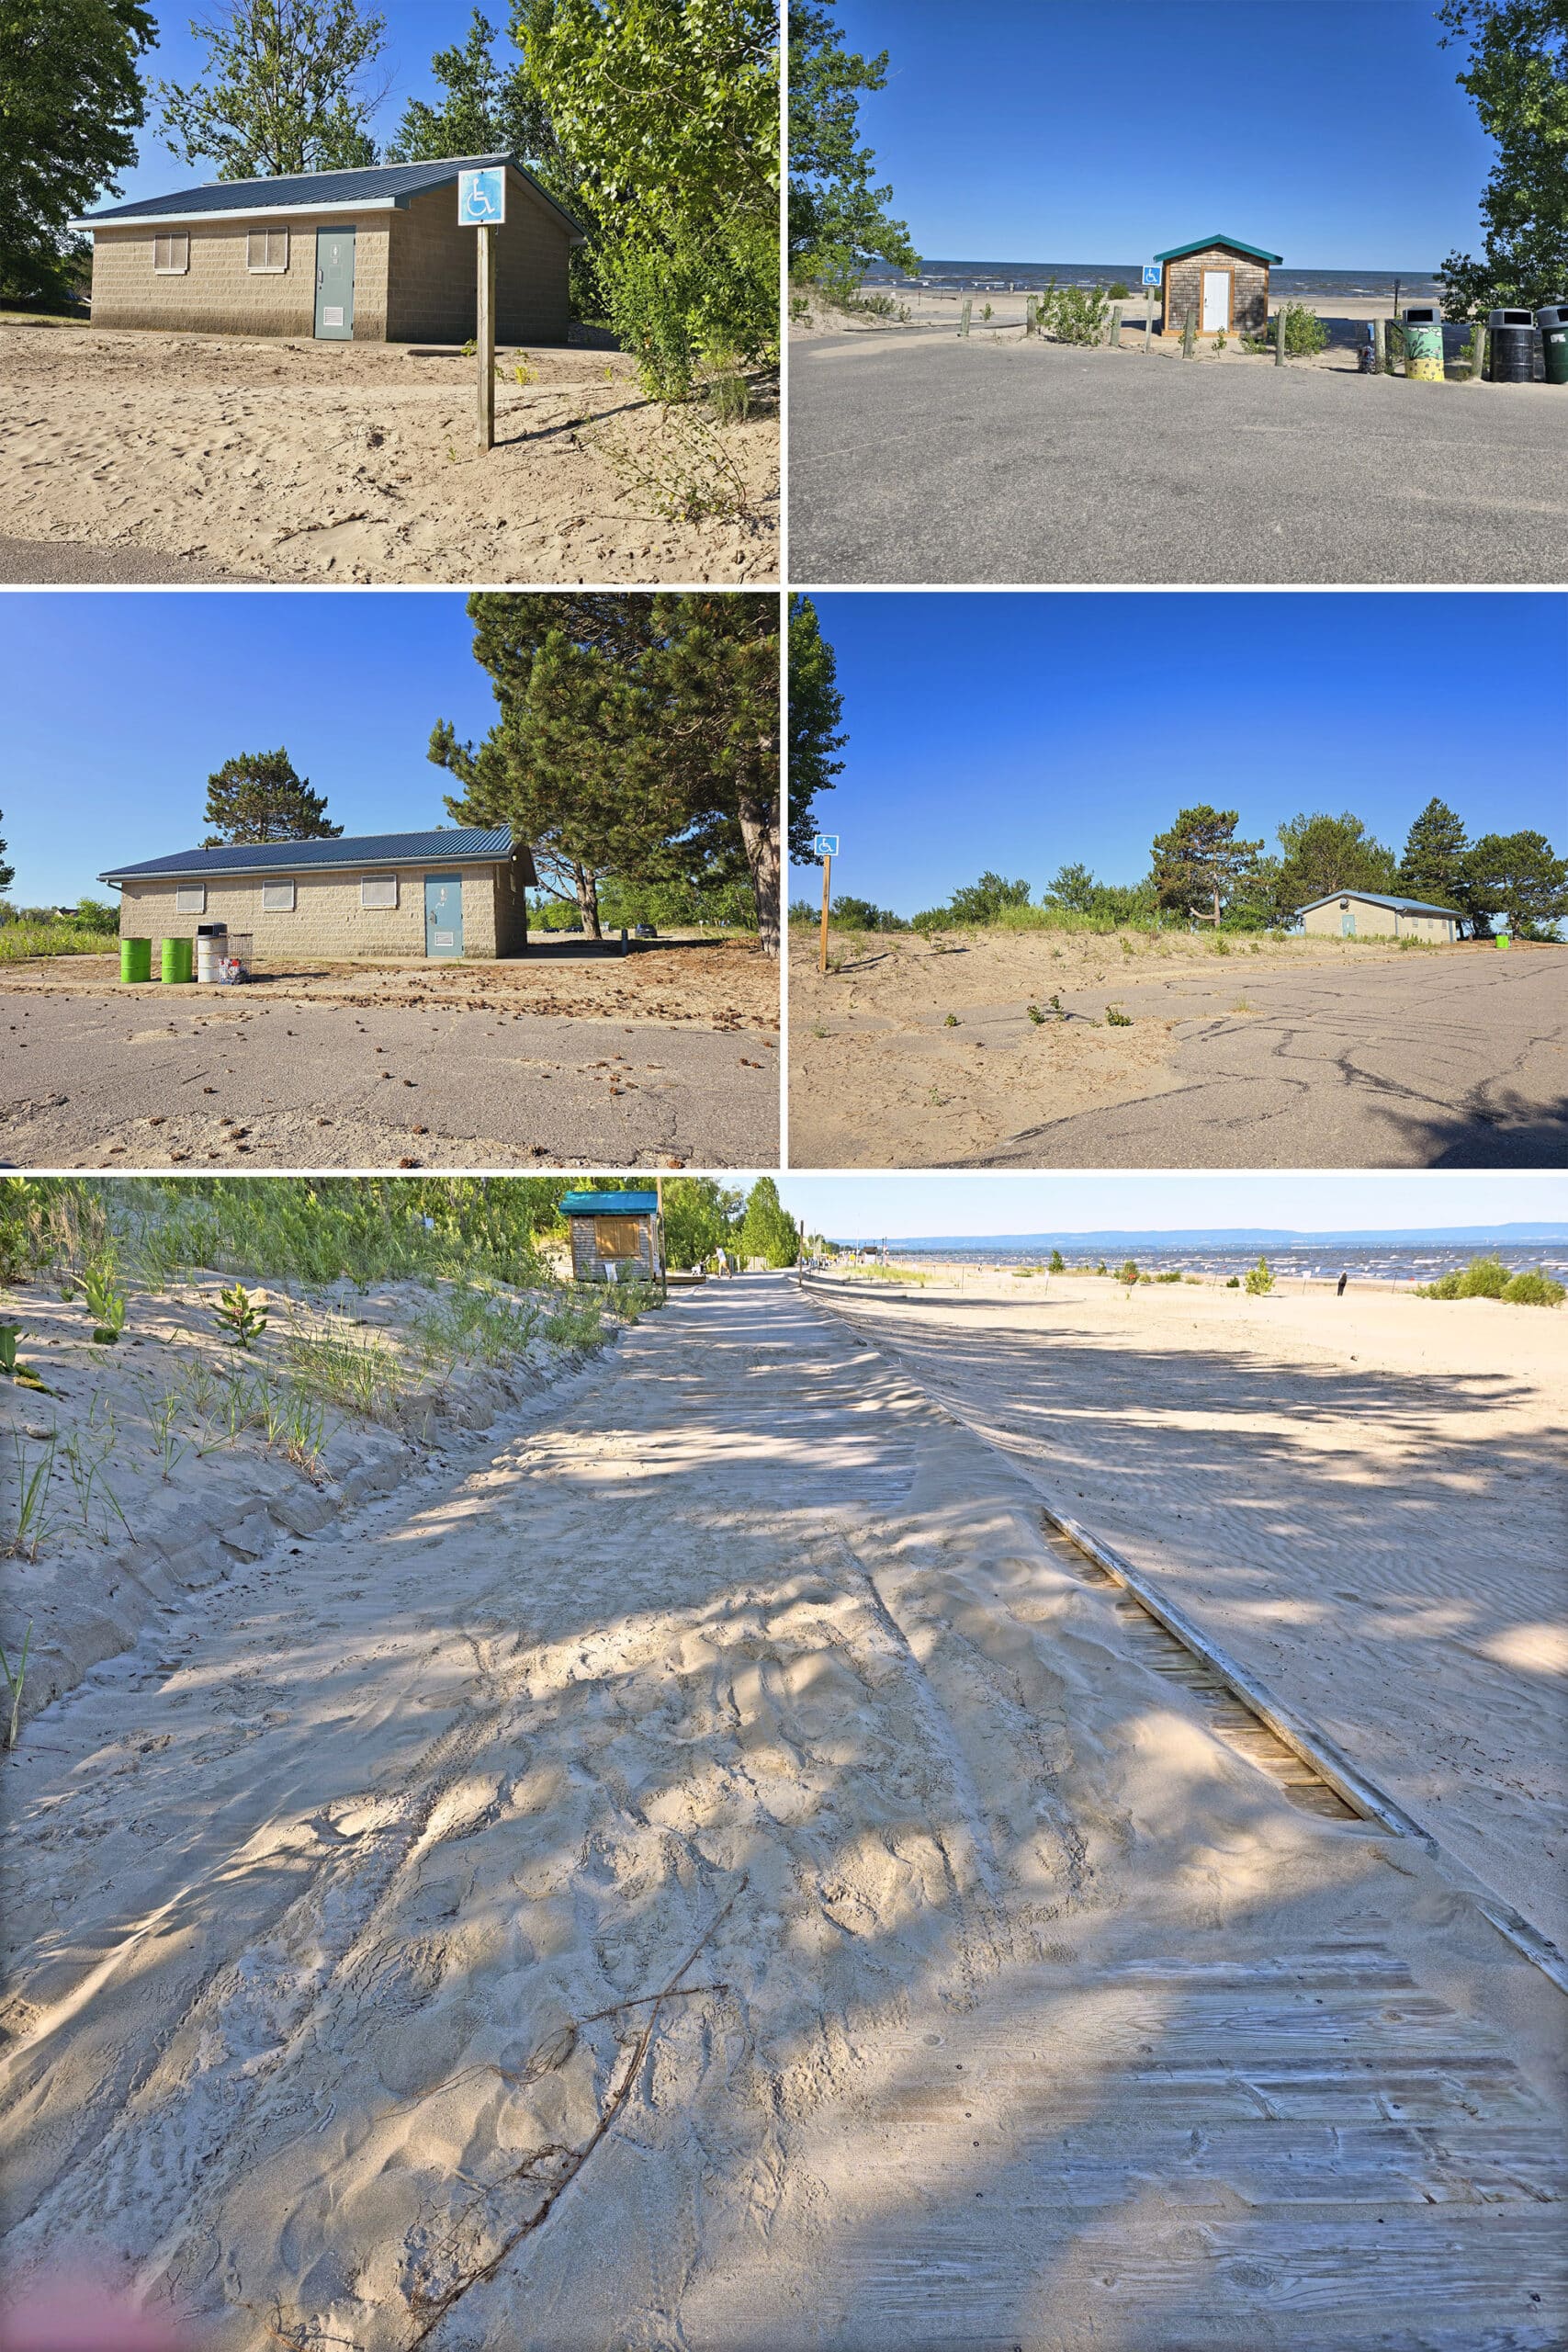 4 part image showing comfort stations and boardwalk at Beach Area 1.